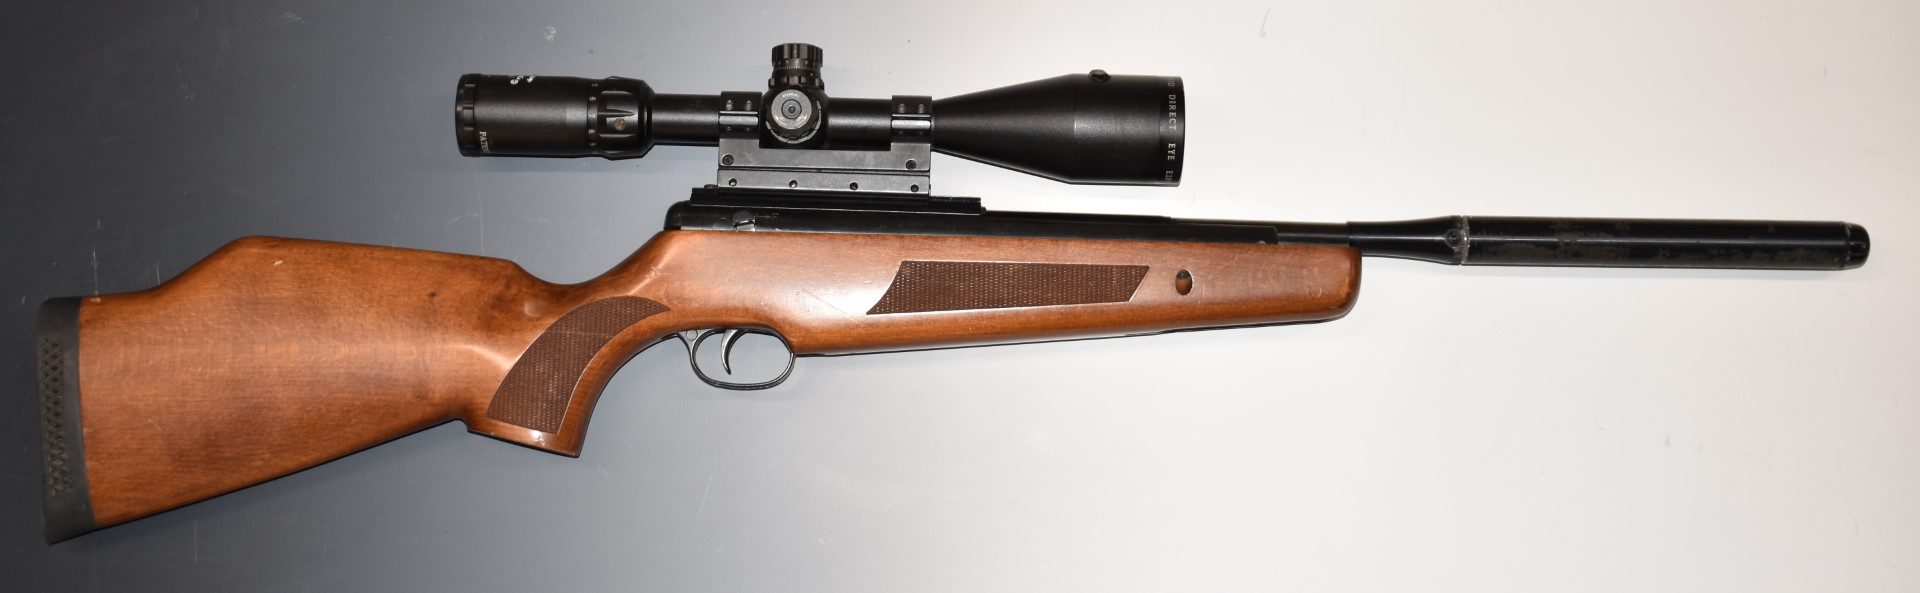 BSA .22 air rifle with chequered semi-pistol grip and forend, raised cheek piece, sound moderator - Image 2 of 10